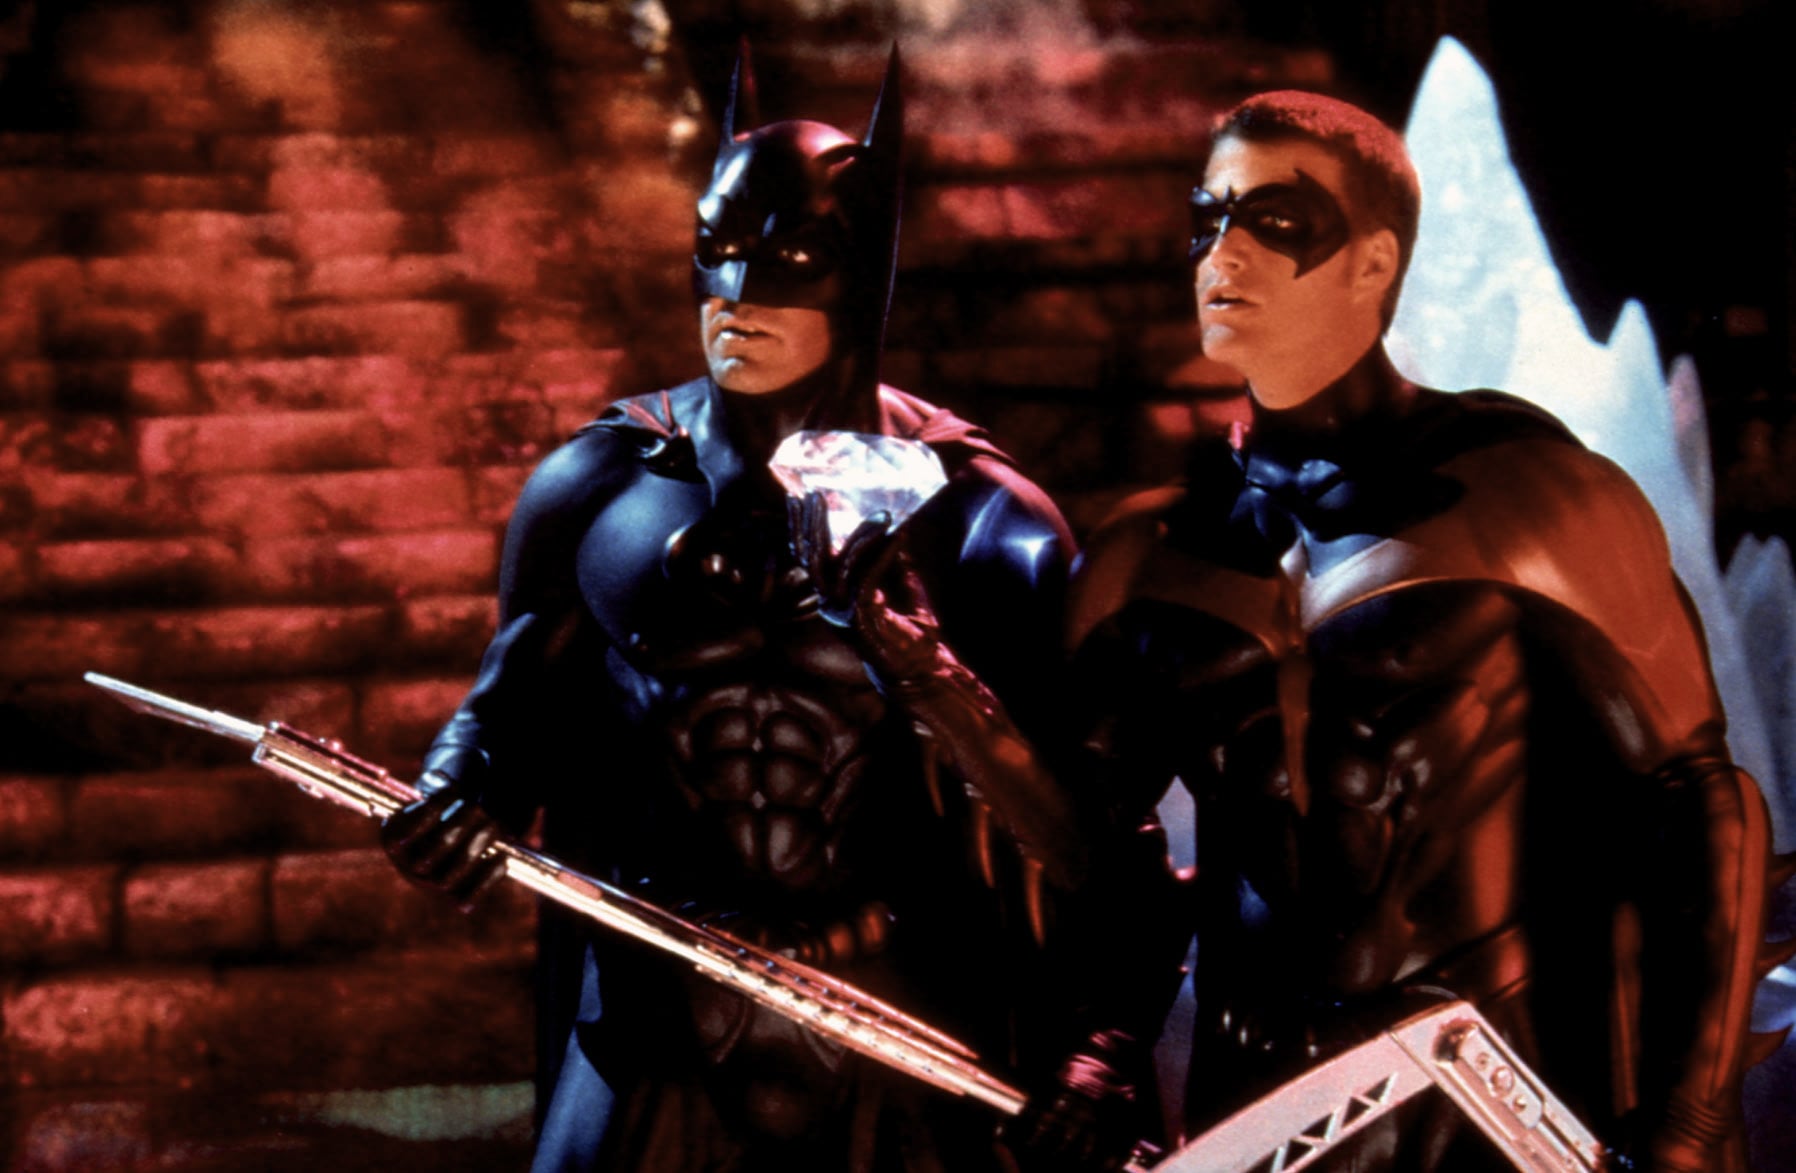  Batman and Robin - George Clooney - Classic ViewMaster